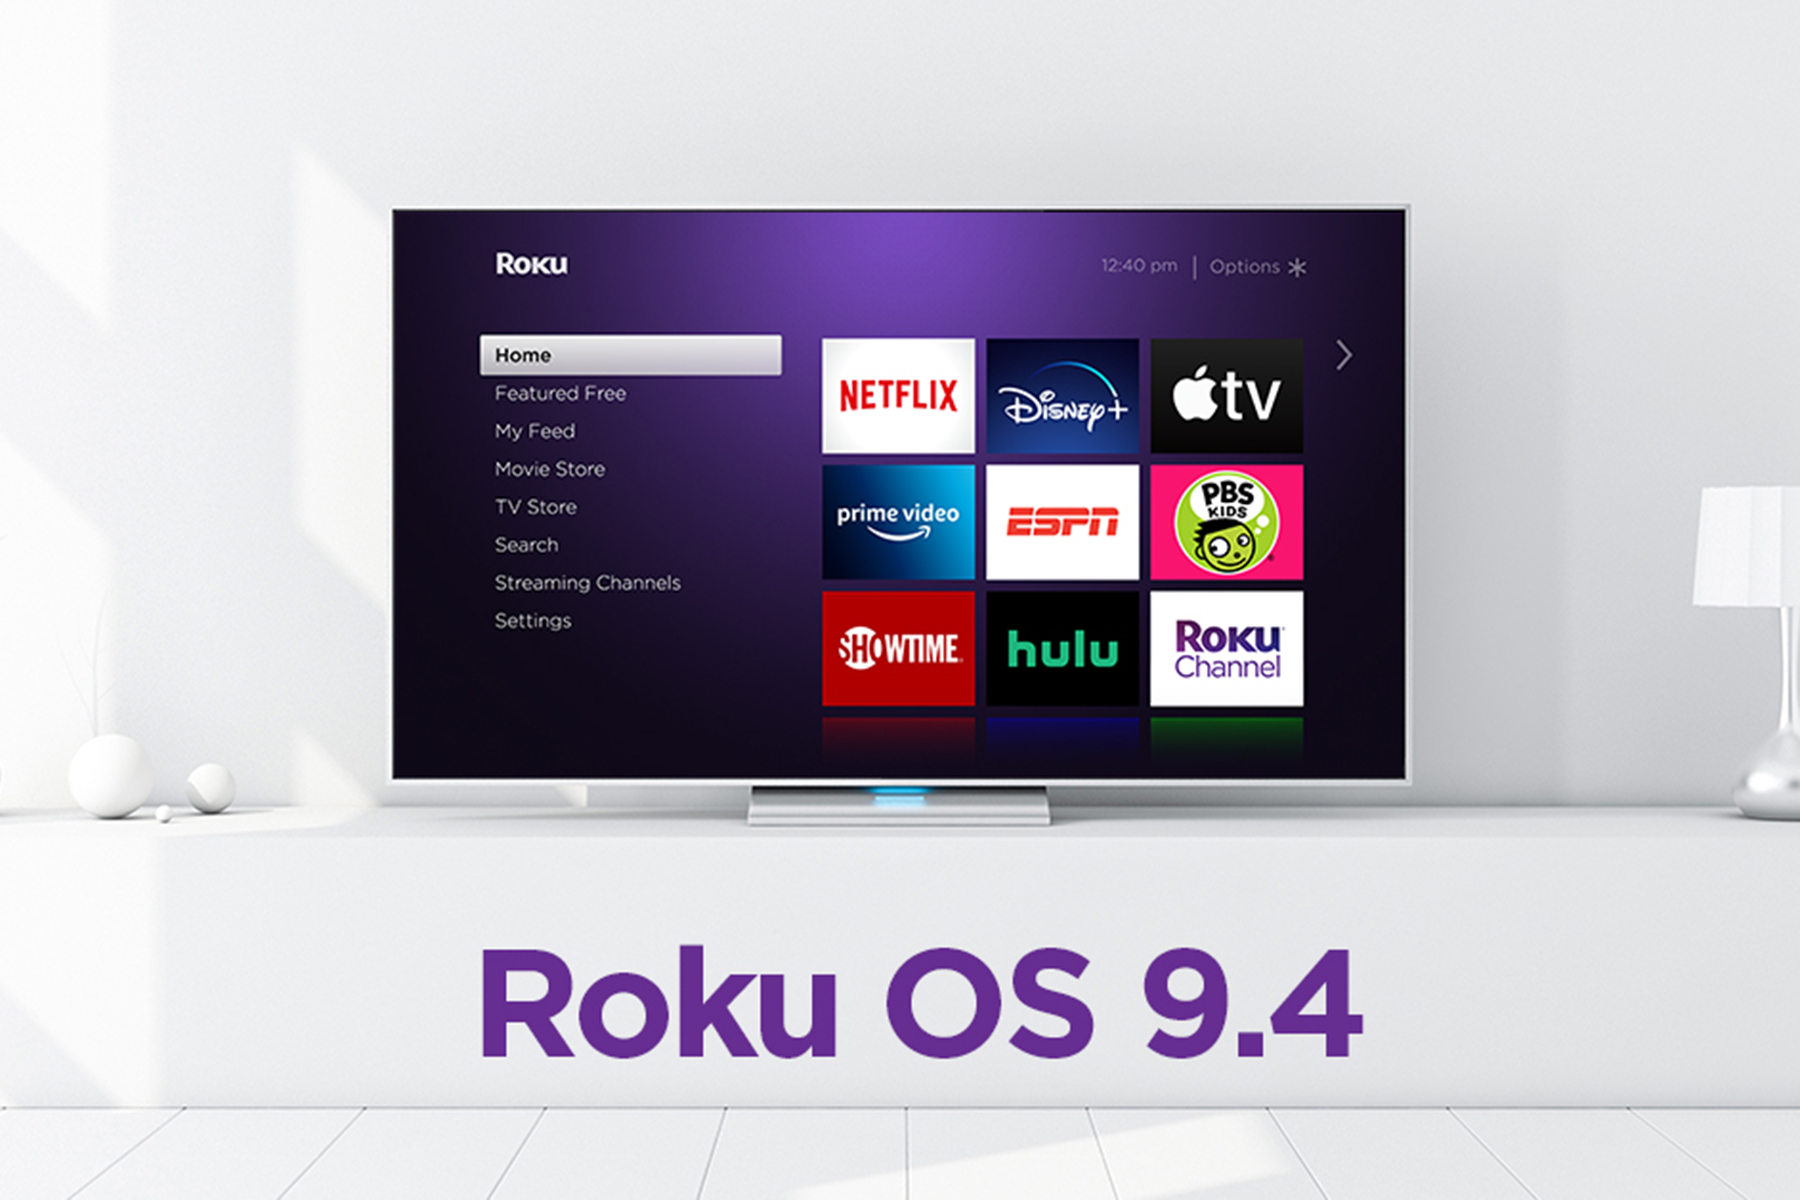 Roku OS 9.4 is rolling out now with AirPlay 2 and HomeKit support